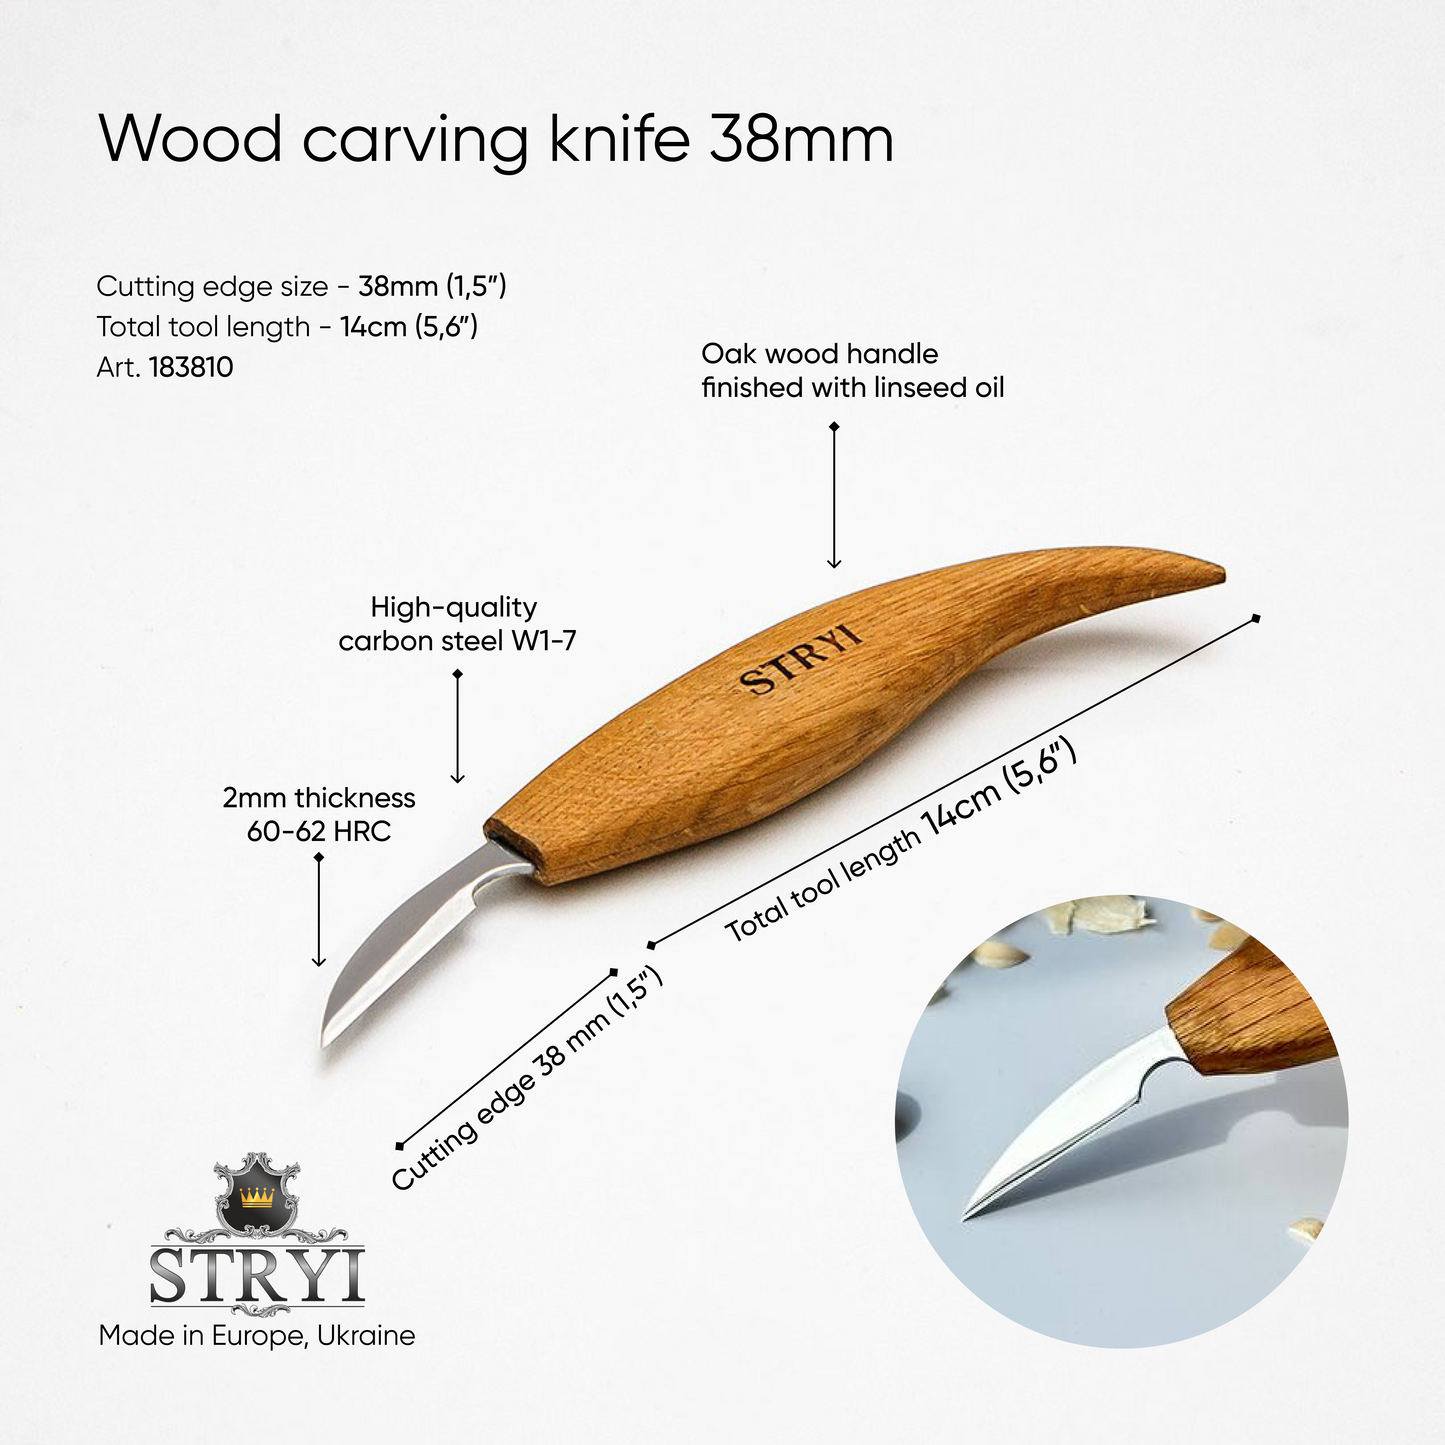 Chip and detailing carving knife 38mm STRYI Profi, Carving knives, Knife for woodcarving